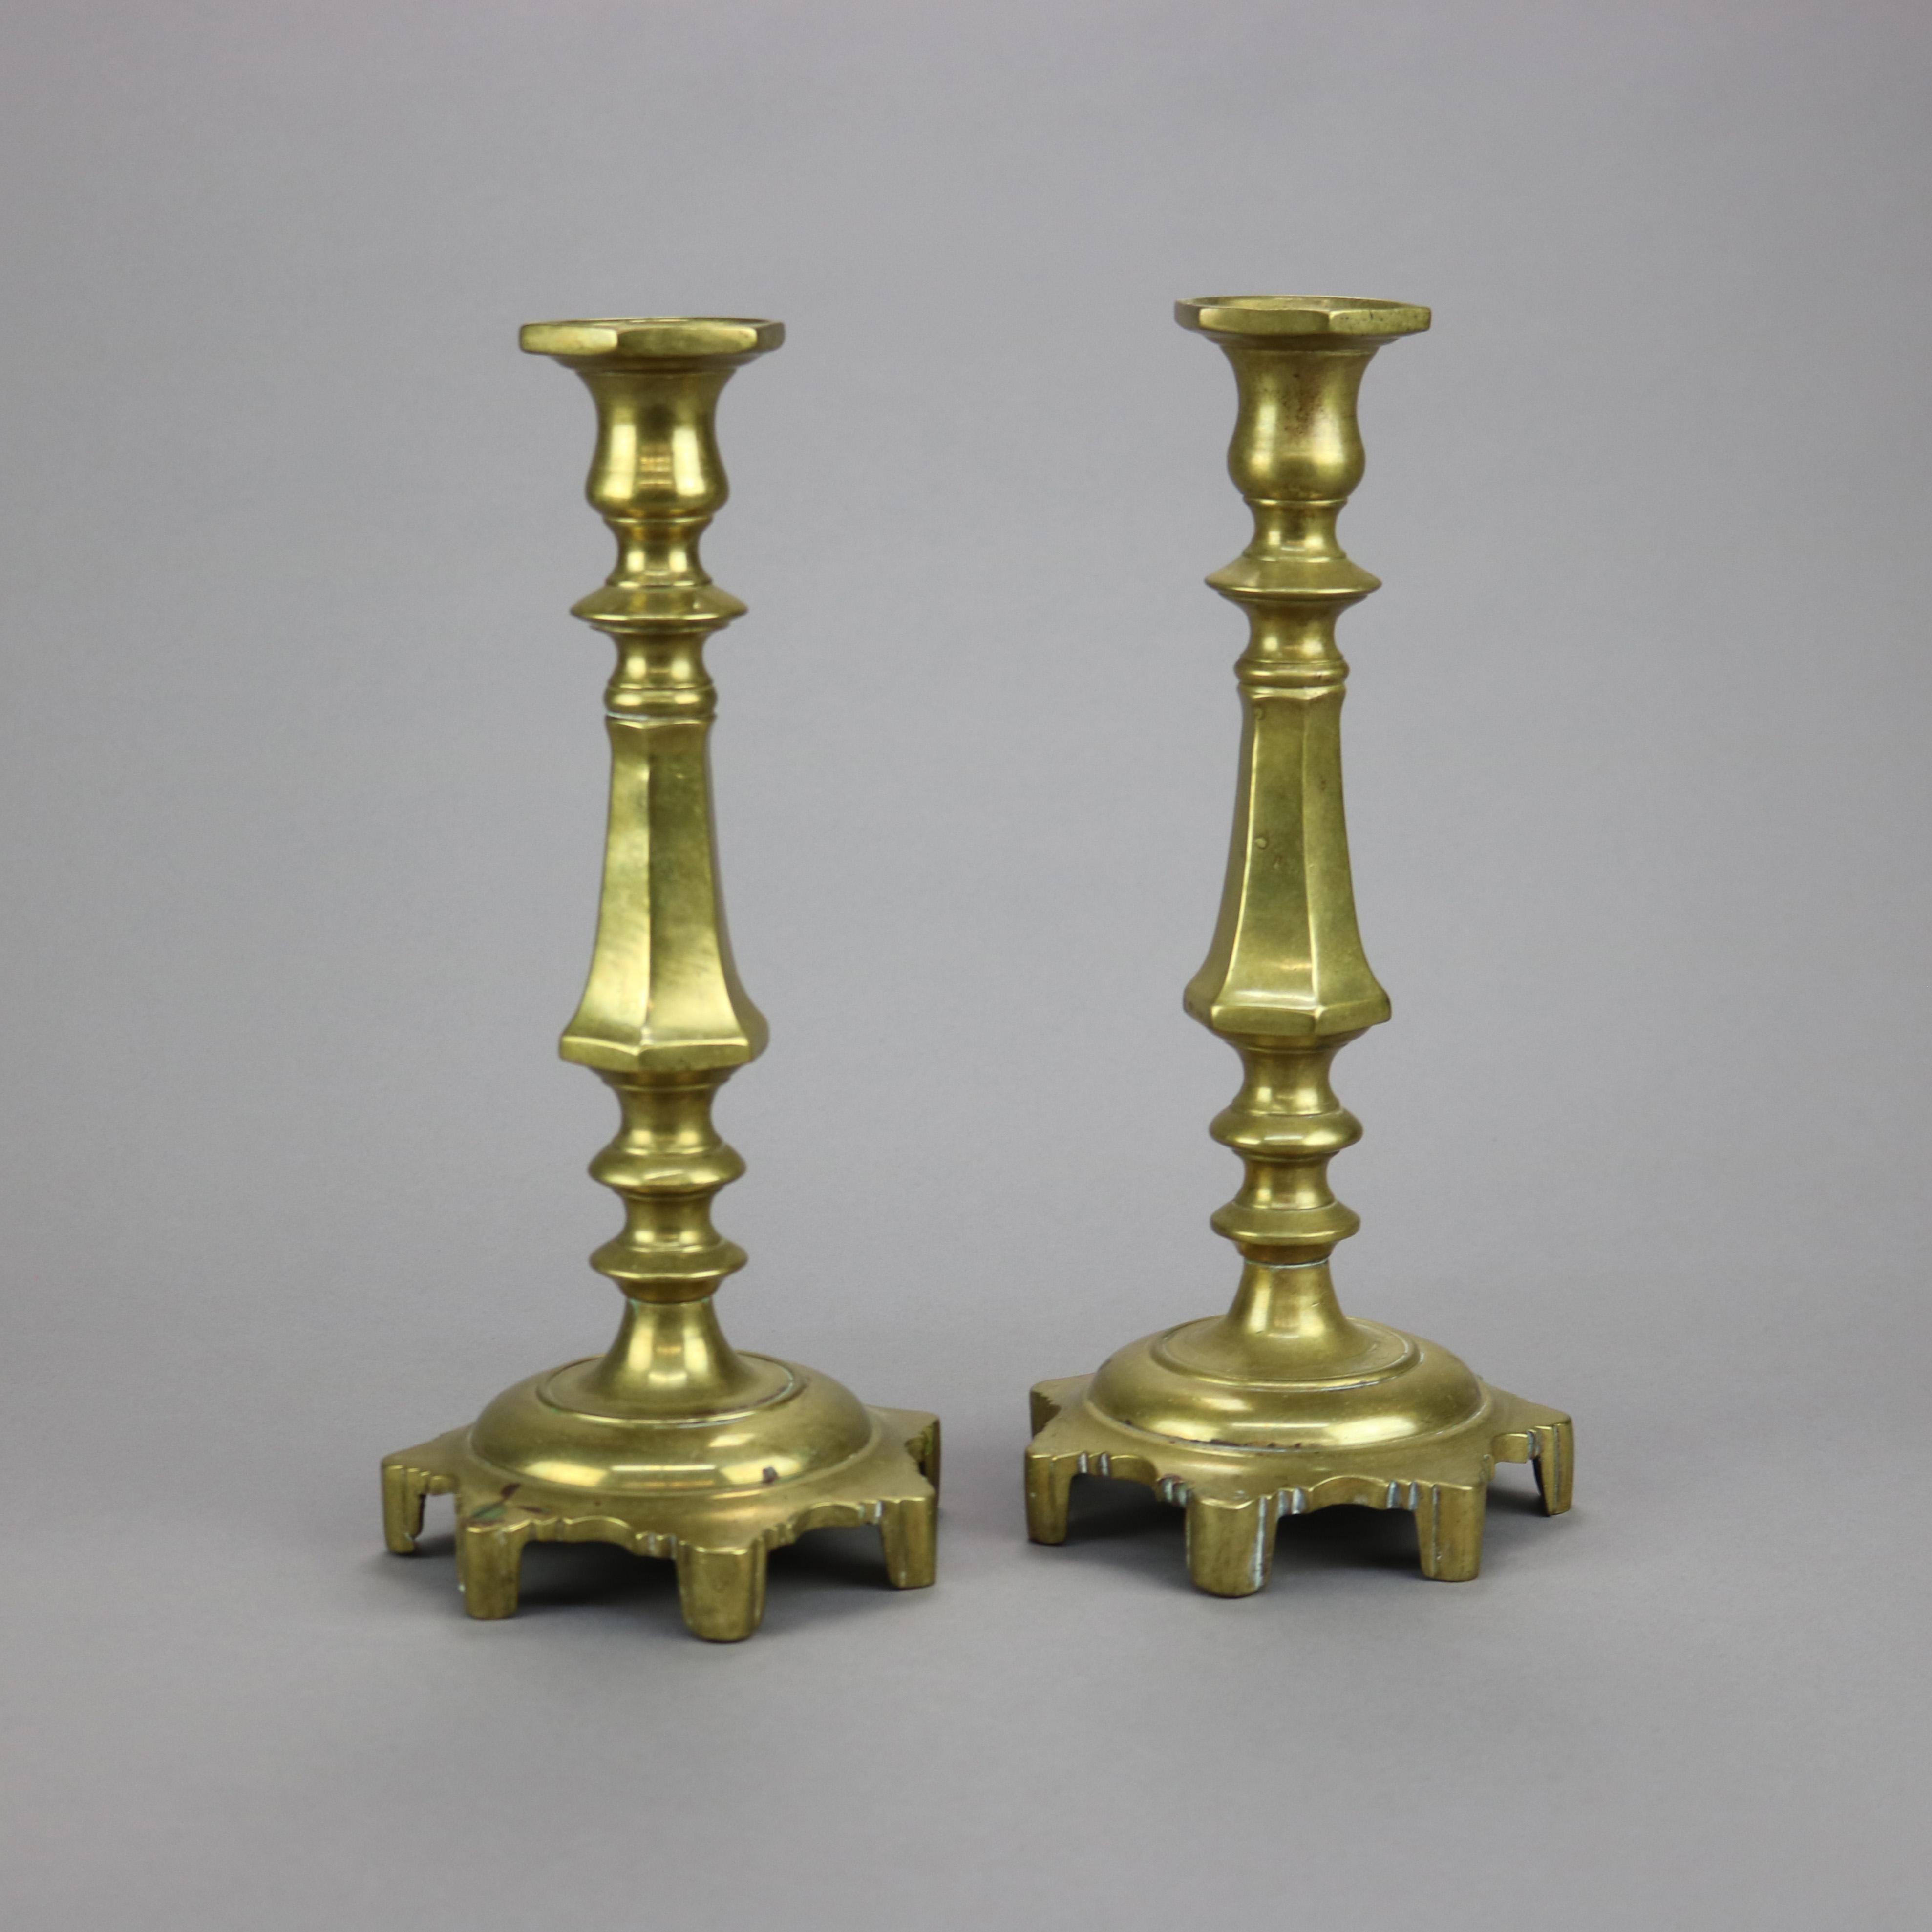 An antique pari of early American candlesticks offers cast brass construction in balustrade form raised on footed base, 19th century

Measures - 11.25''H x 5''W x 5''D.

Catalogue Note: Ask about DISCOUNTED DELIVERY RATES available to most regions